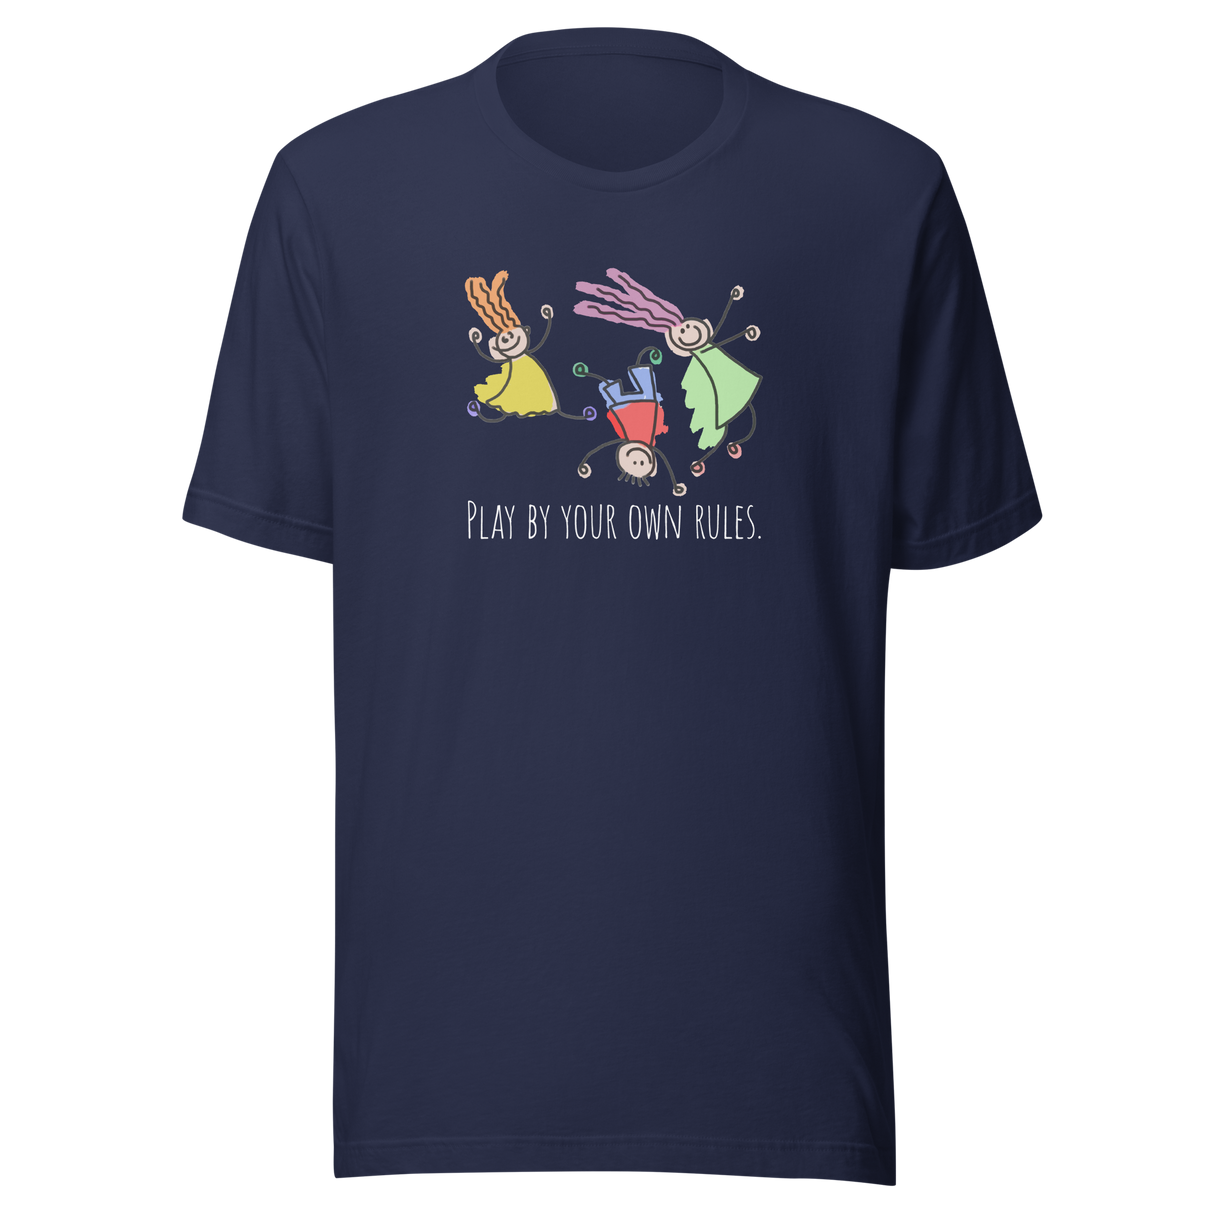 play-by-your-own-rules-achieve-tee-dreams-t-shirt-attitude-tee-inspirational-t-shirt-motivational-tee-1#color_navy